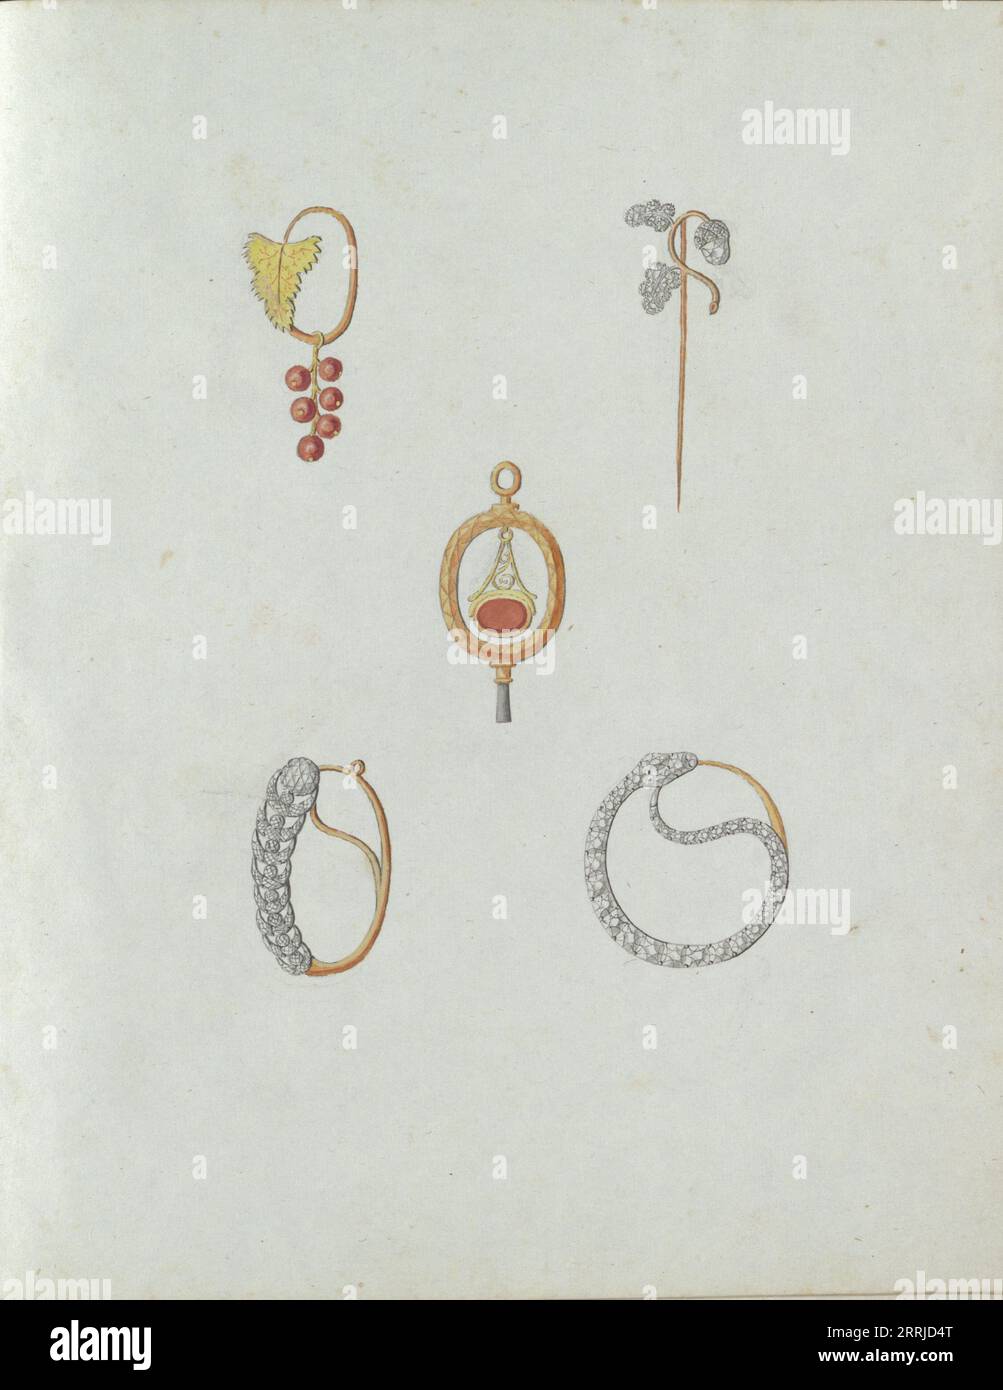 Five jewels, one of which is with a bunch of berries, c.1800-c.1810. Stock Photo